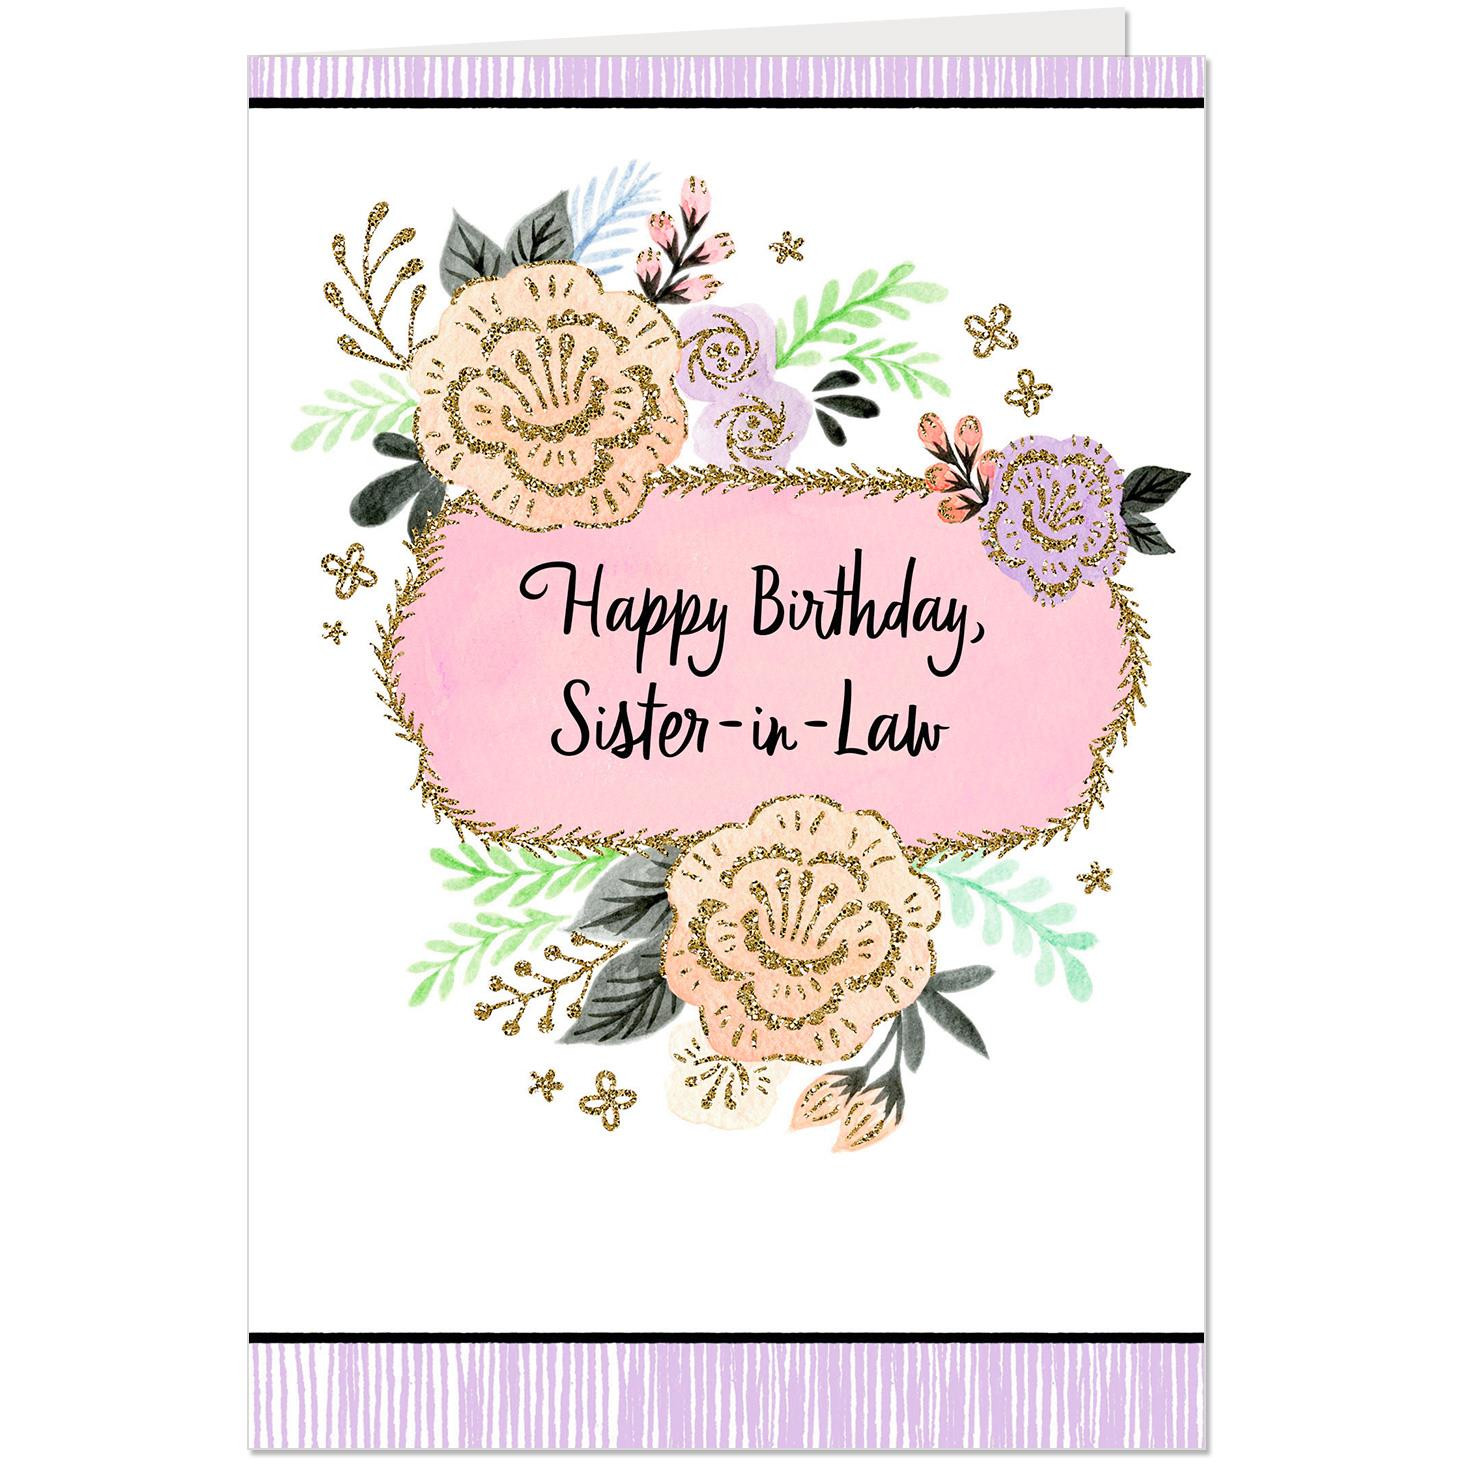 Birthday Card For Sister In Law
 Glittery Flowers Birthday Card for Sister in Law